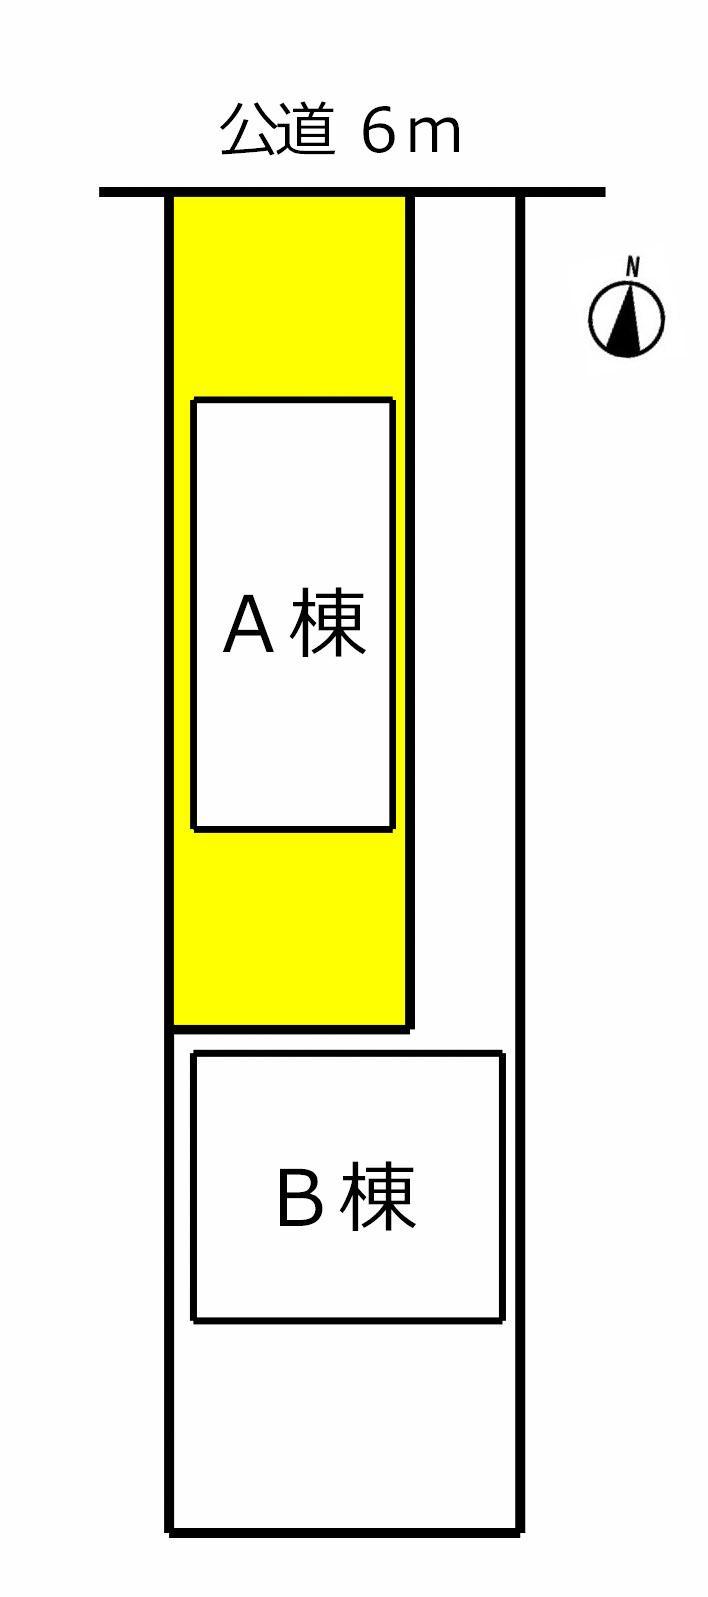 Compartment figure. The property is a building A